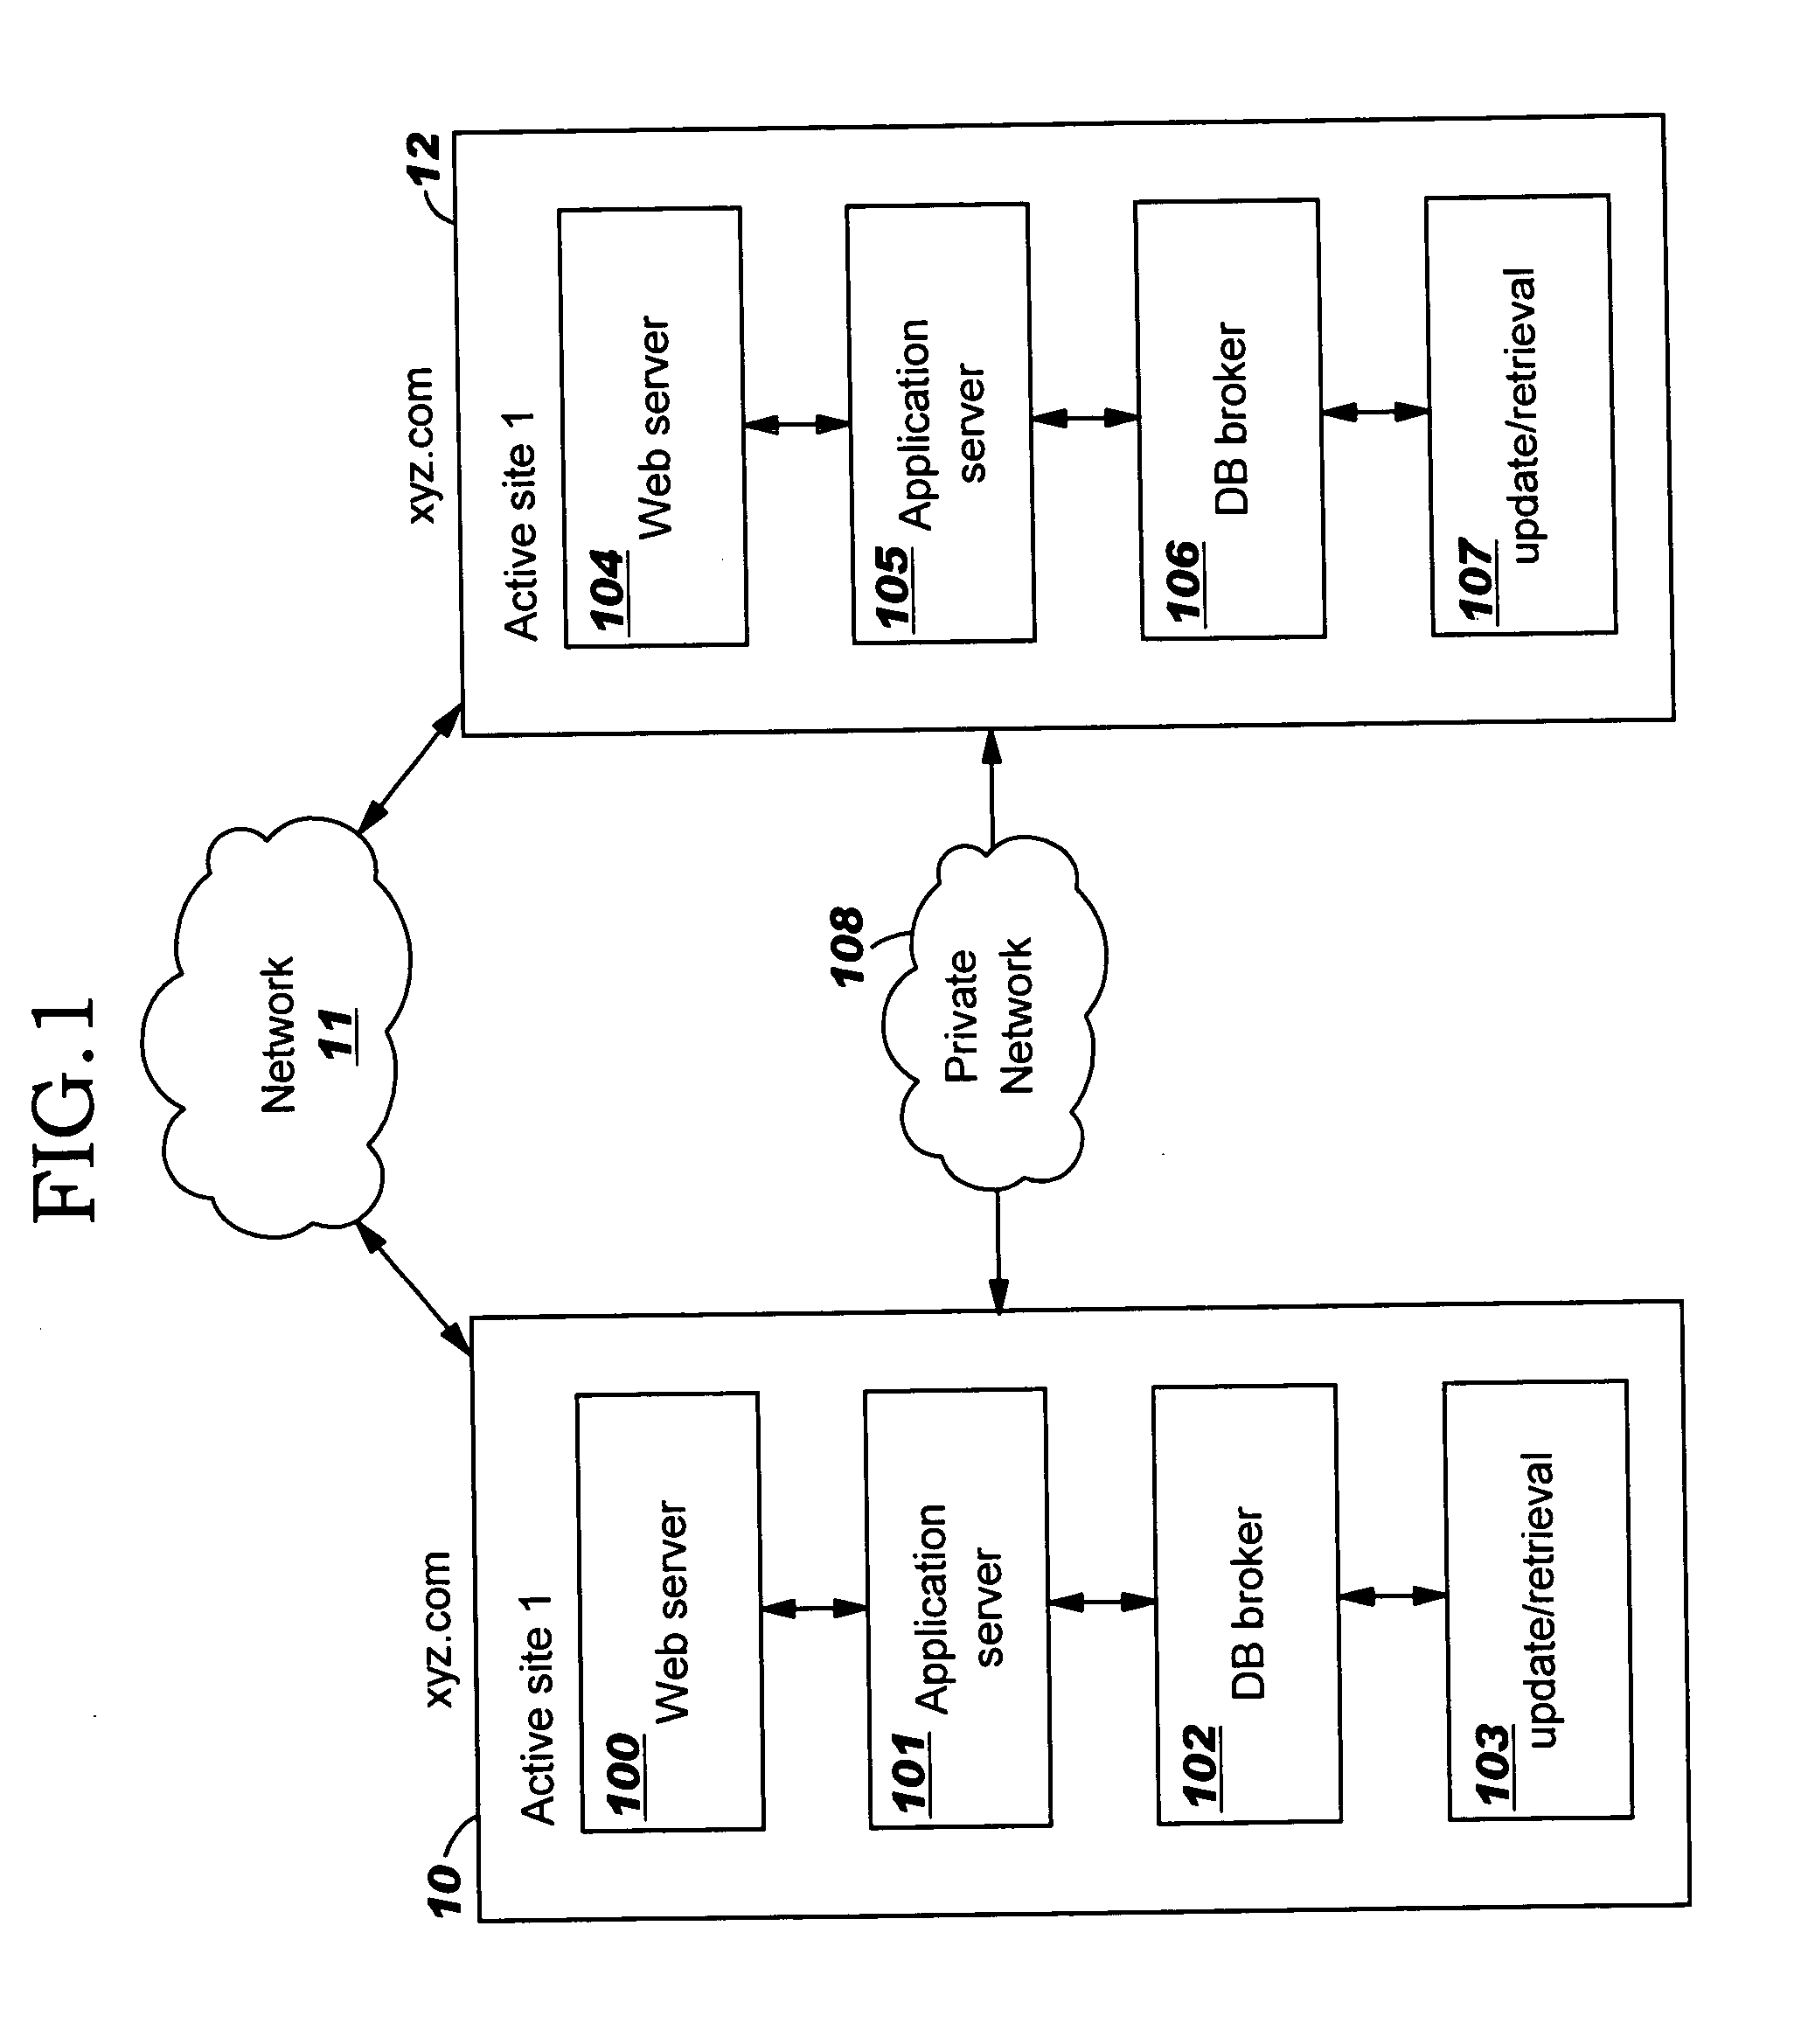 Data synchronization between distributed computers